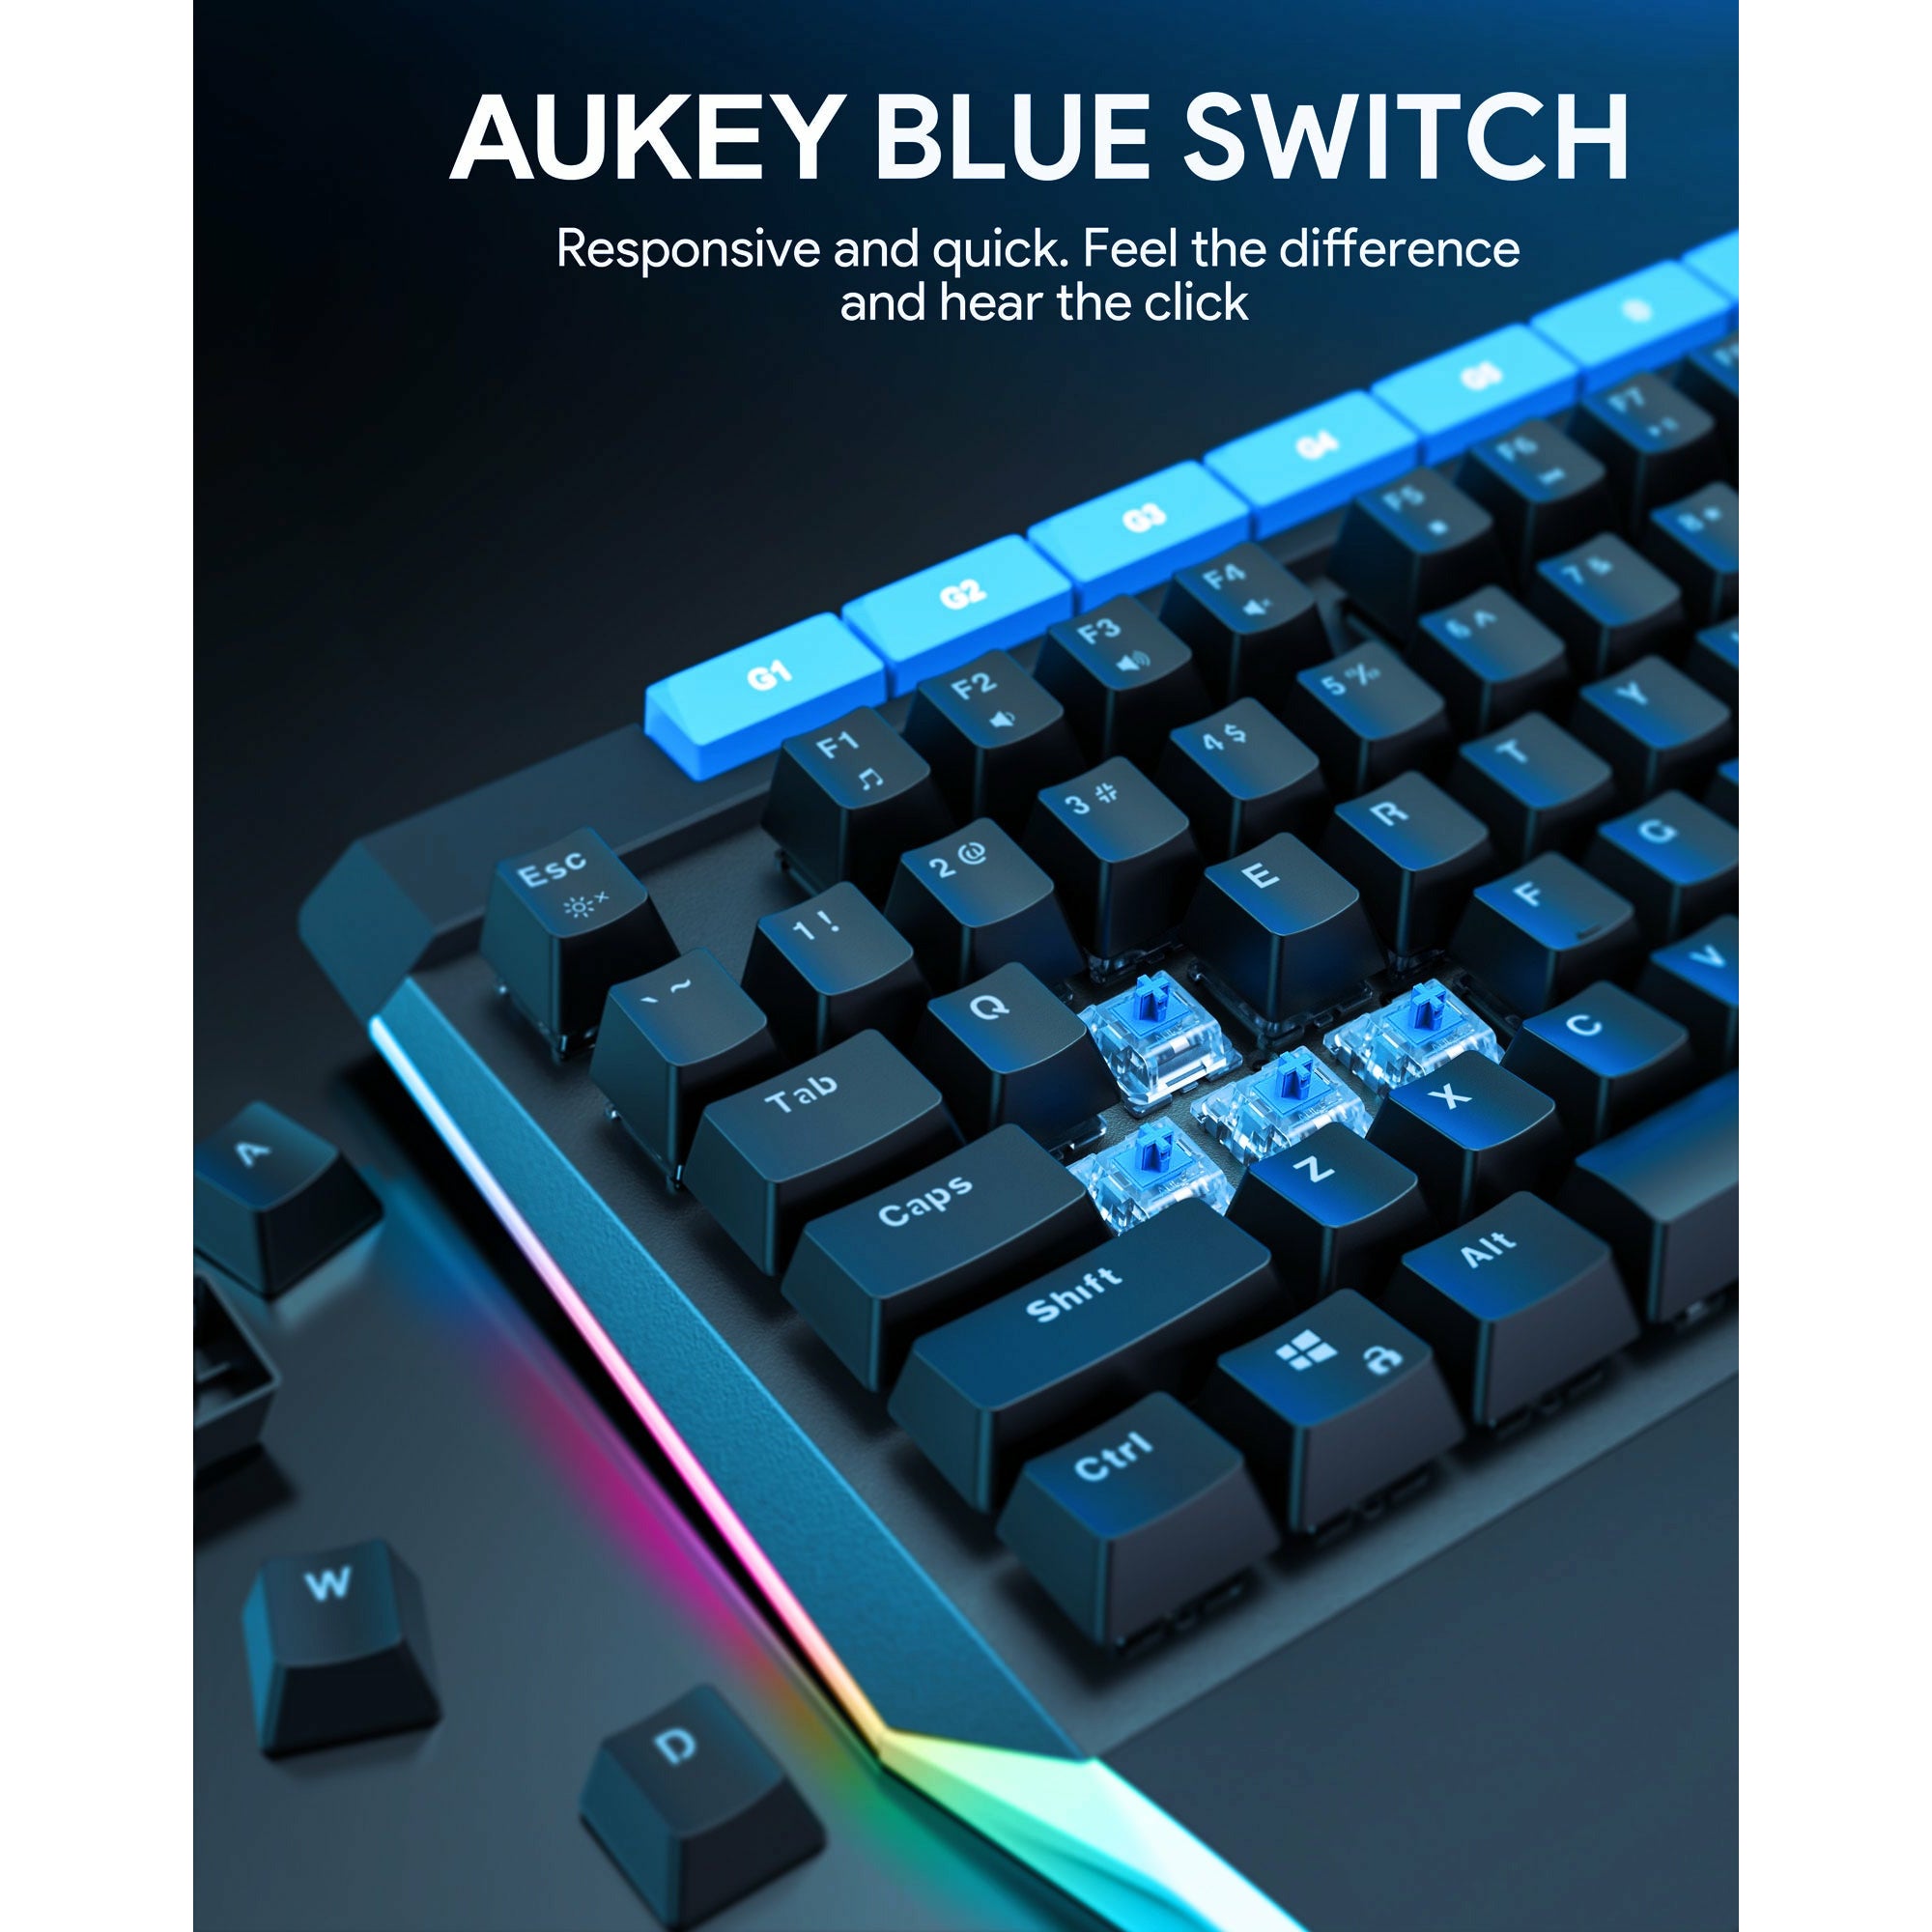 AUKEY KMG17 Mechanical Keyboard Blue Switches 104key with Volume Control Button